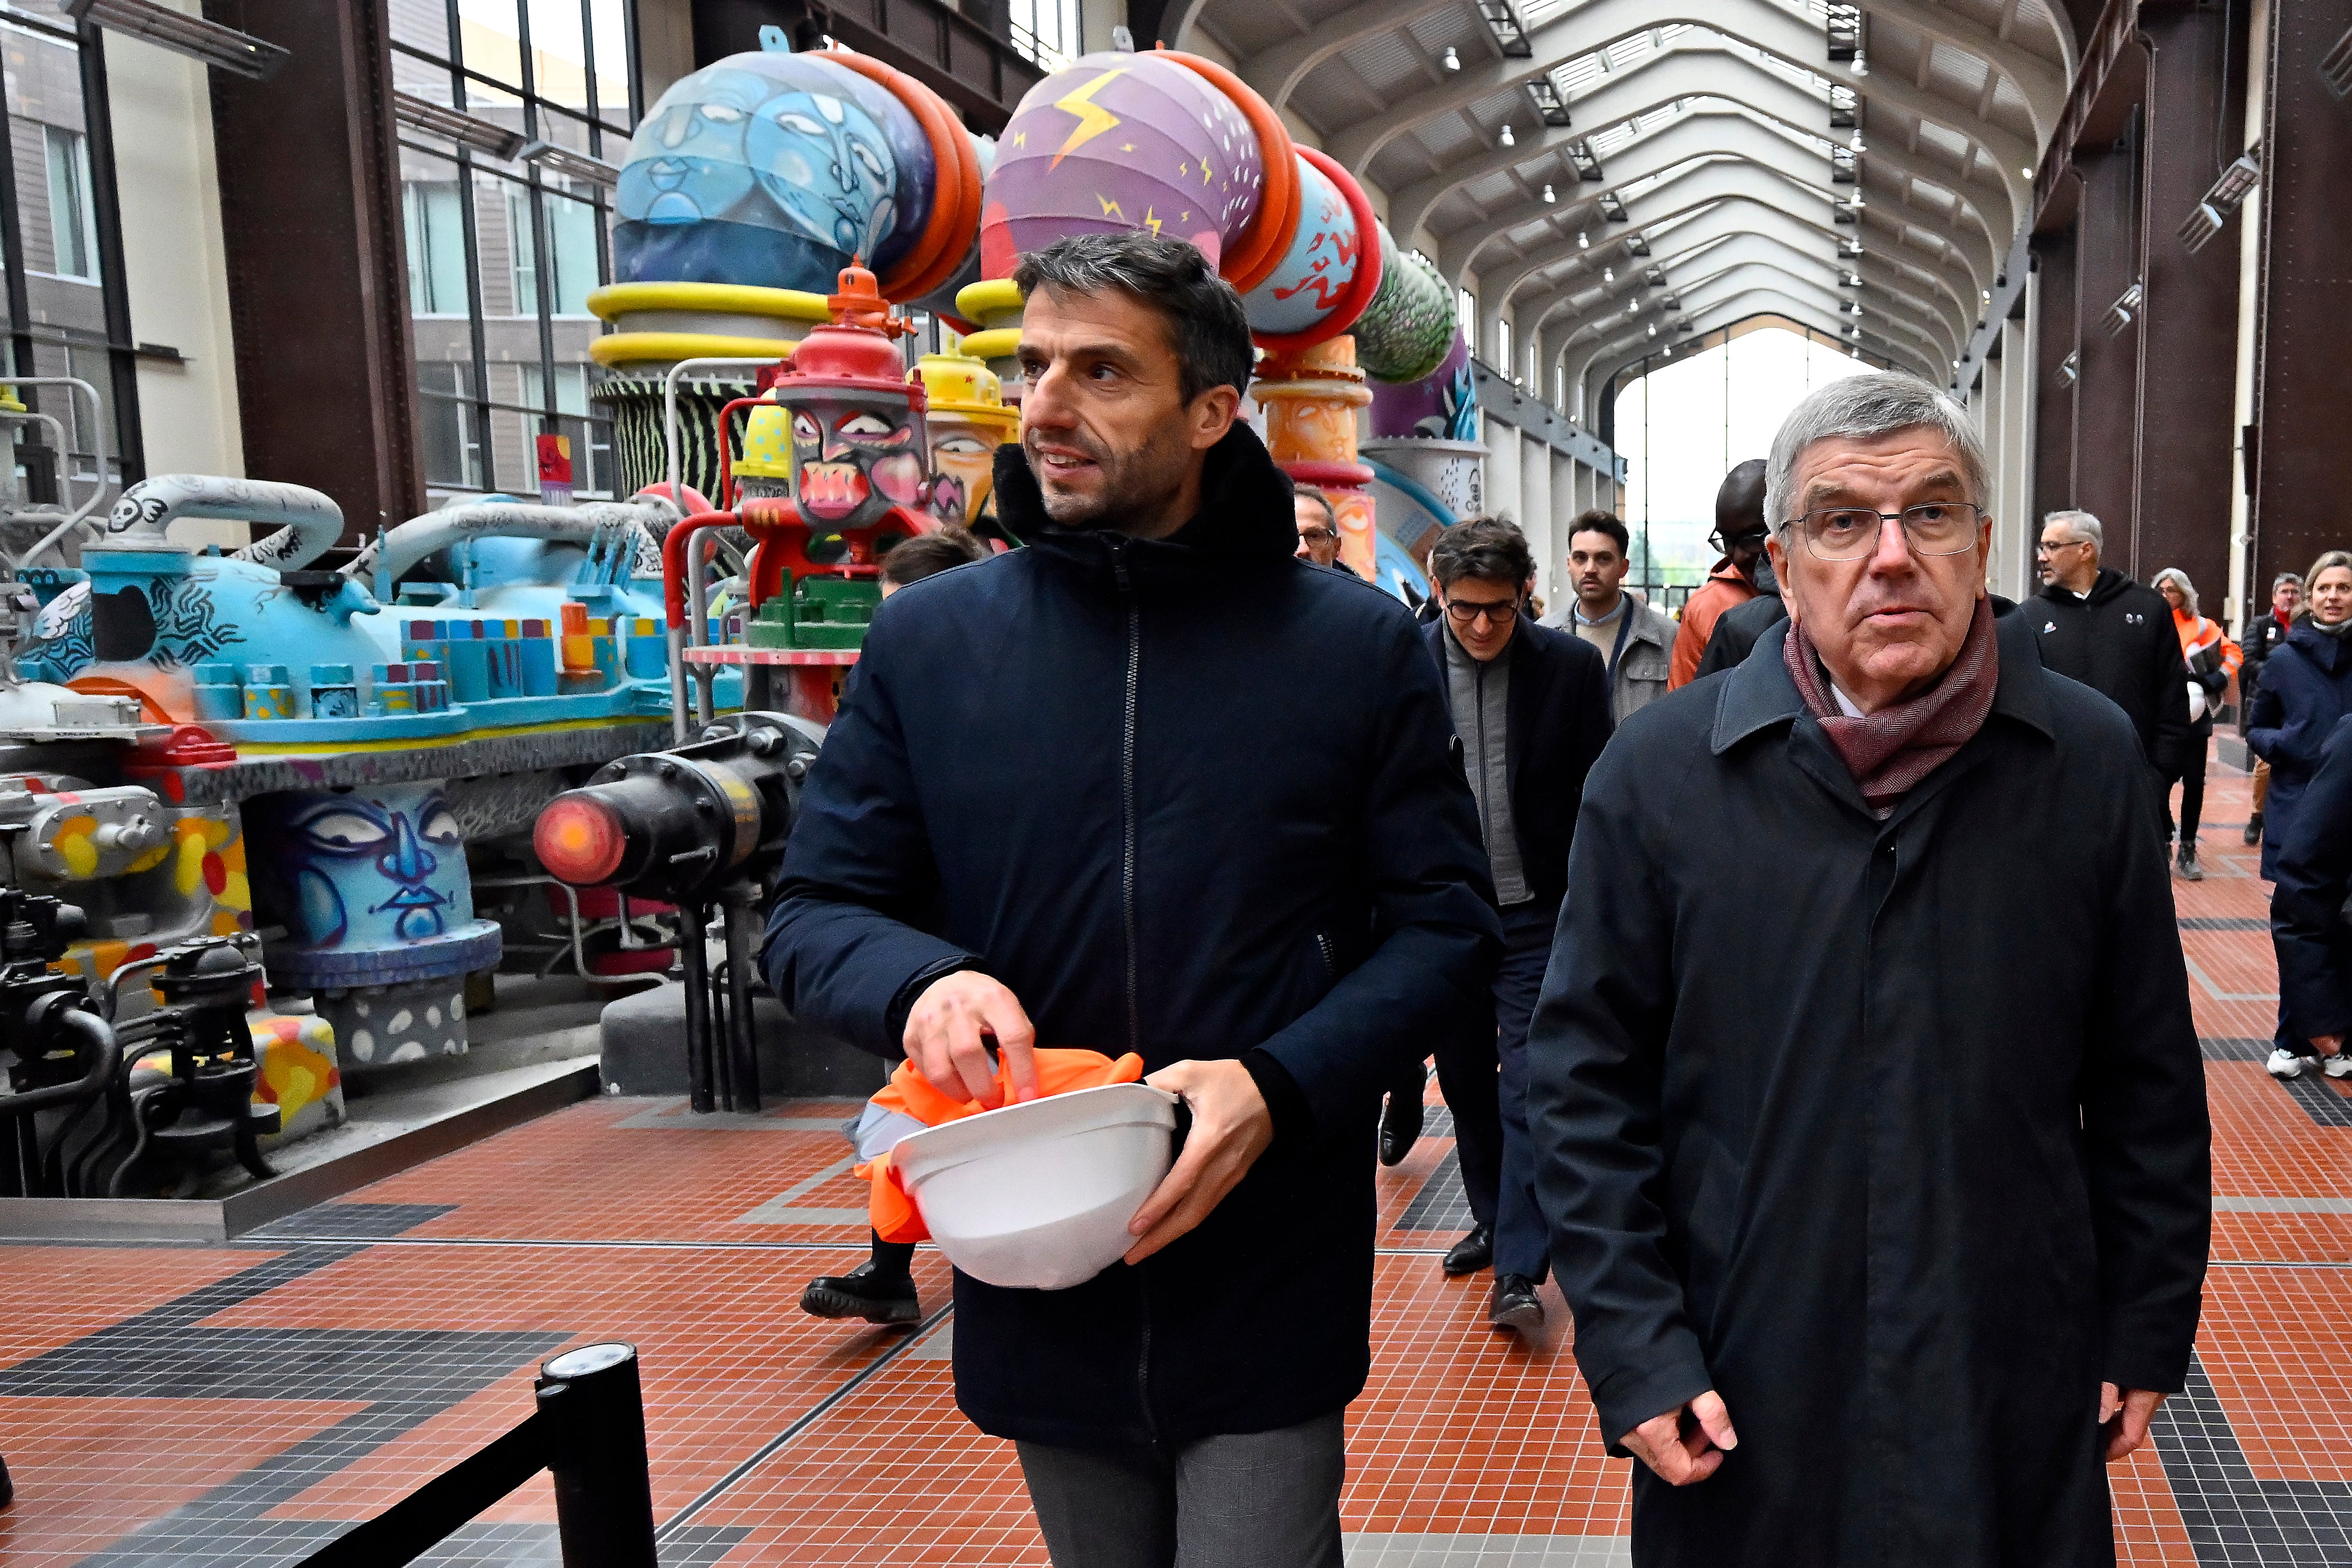 IOC president Thomas Bach, right, and Paris 2024 president Tony Estanguet visit the Olympic Village in December